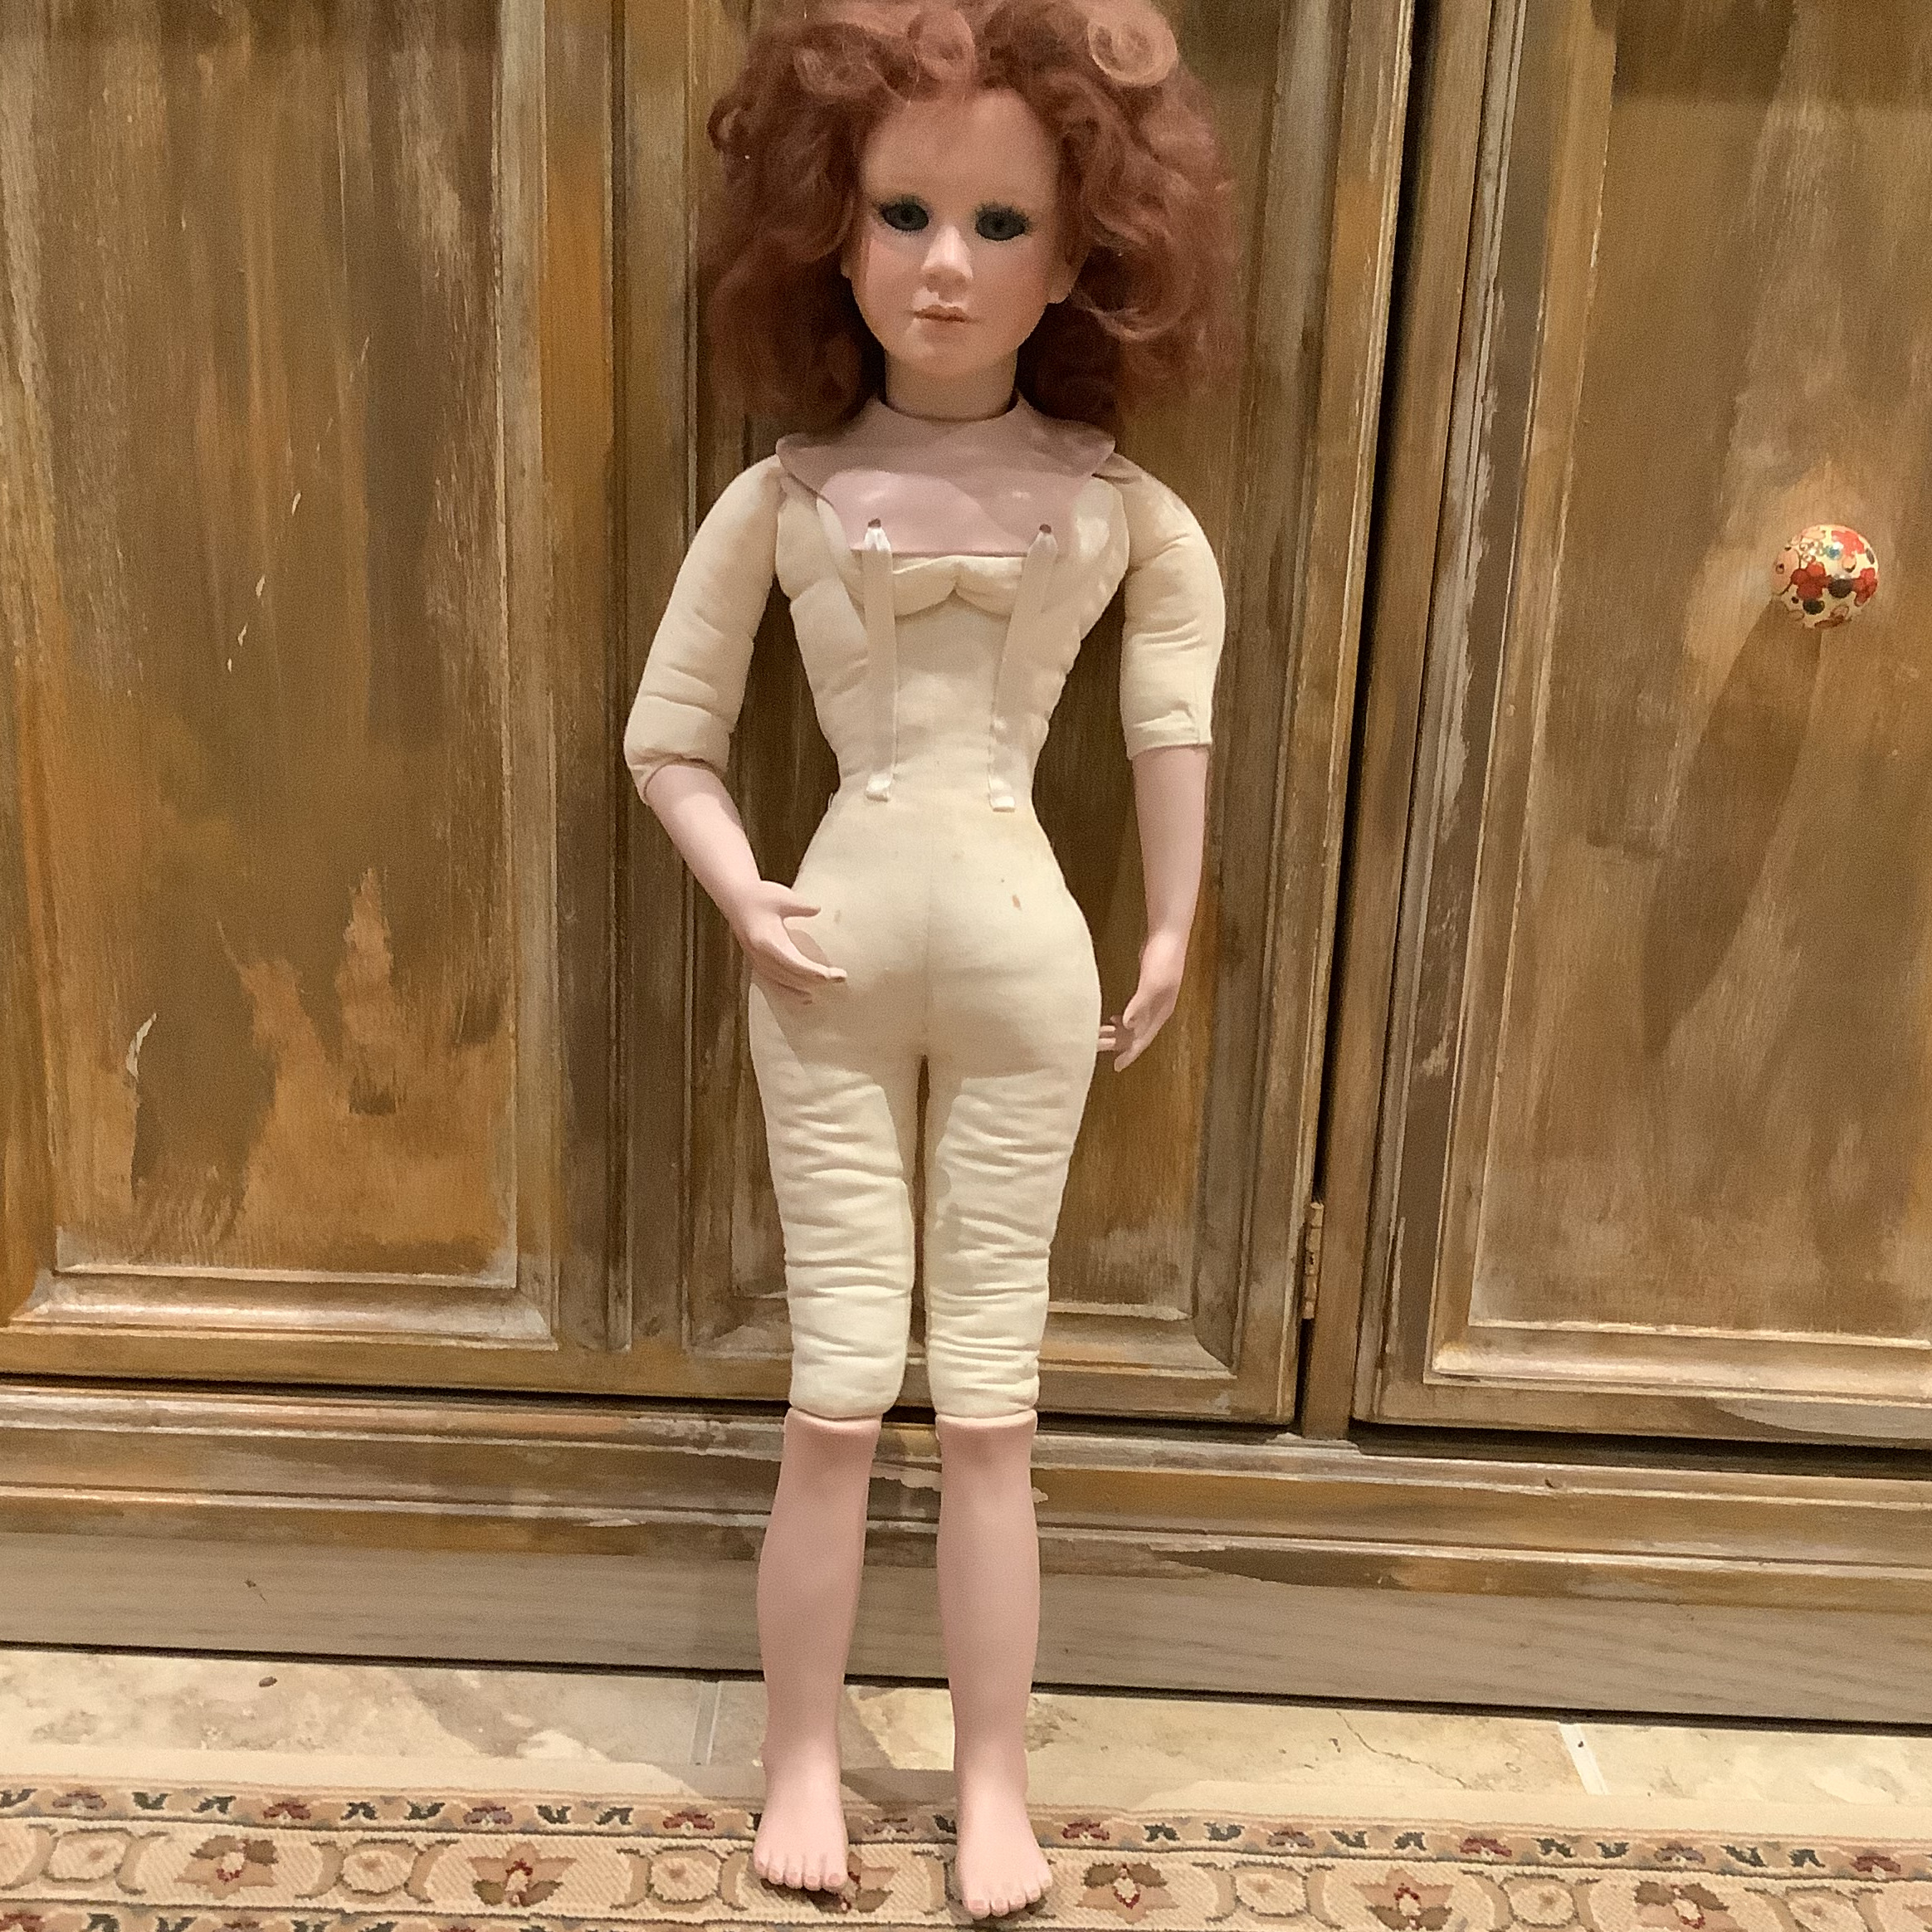 Nude lady doll with fabric body and unstyled red hair, and fully painted face